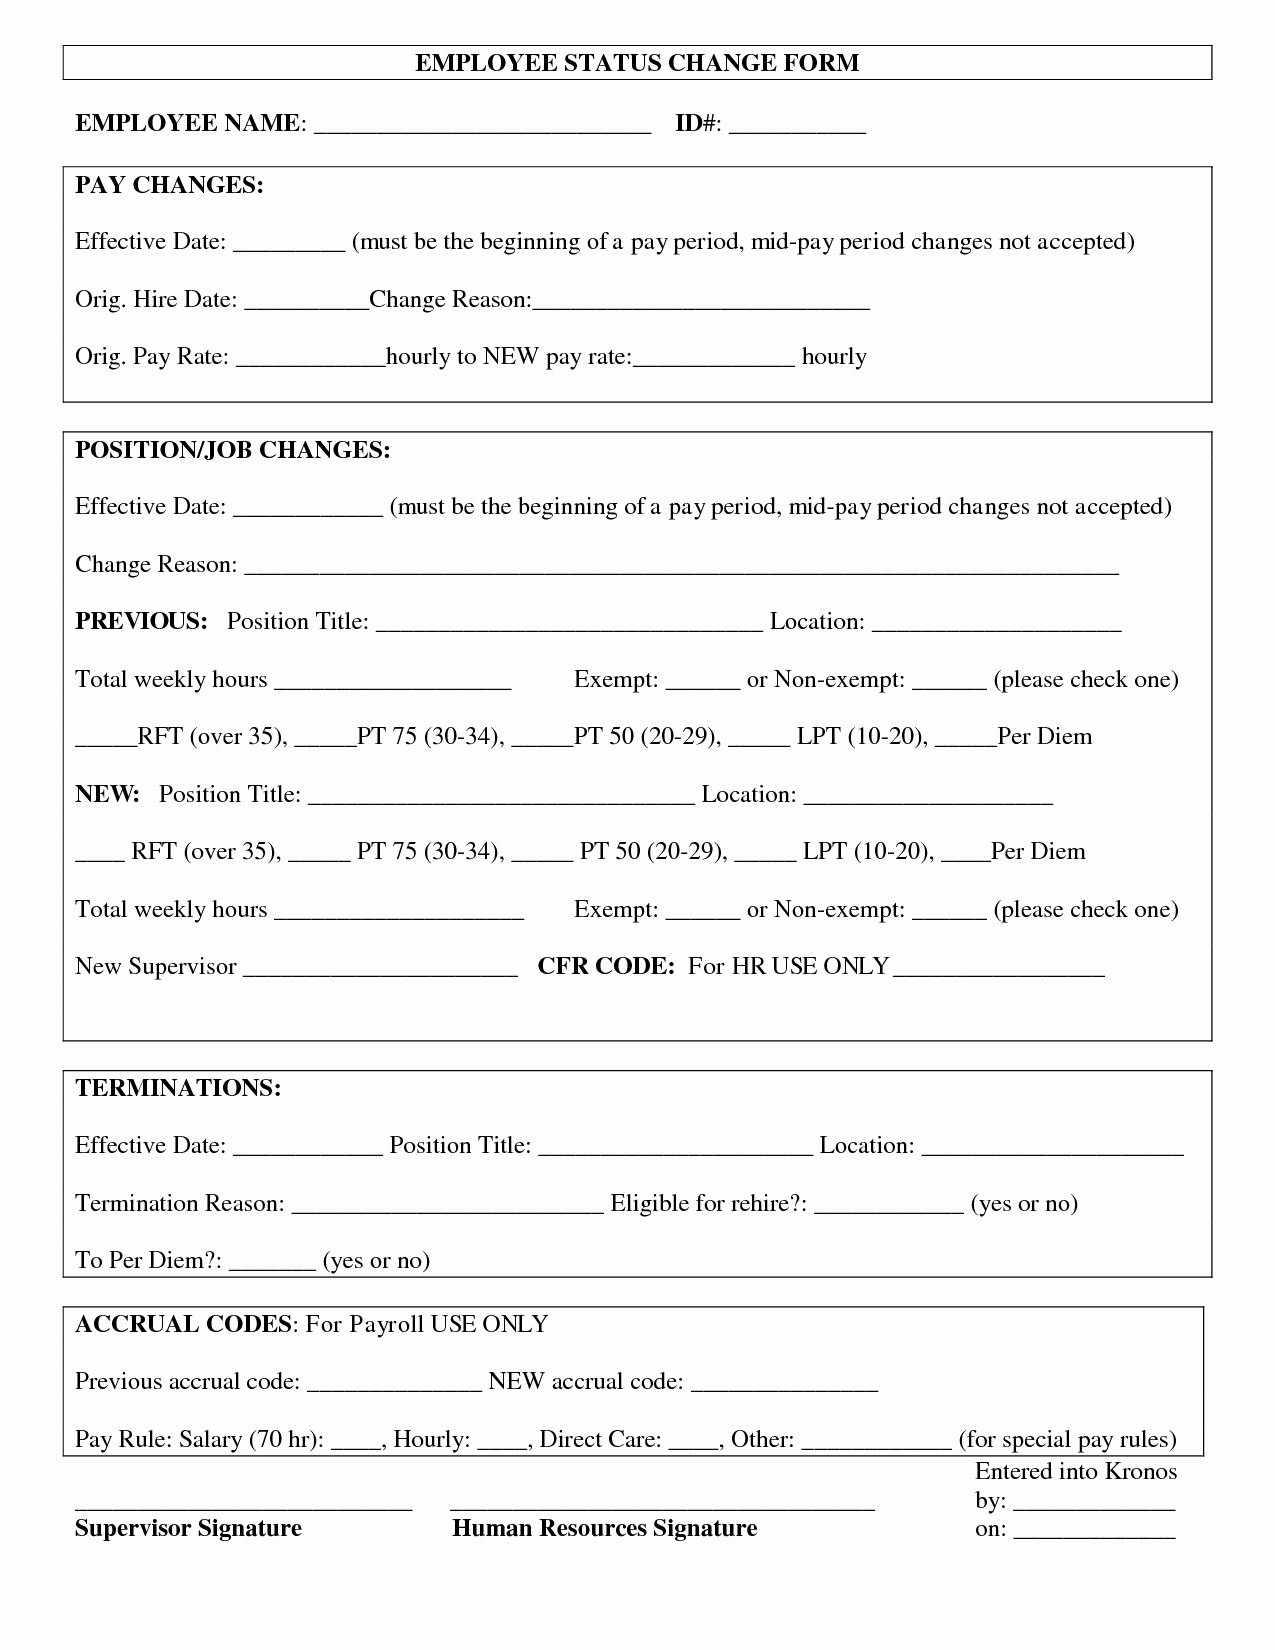 Employee Change form Template Awesome Best S Of Employee Paid In Full form Template Paid